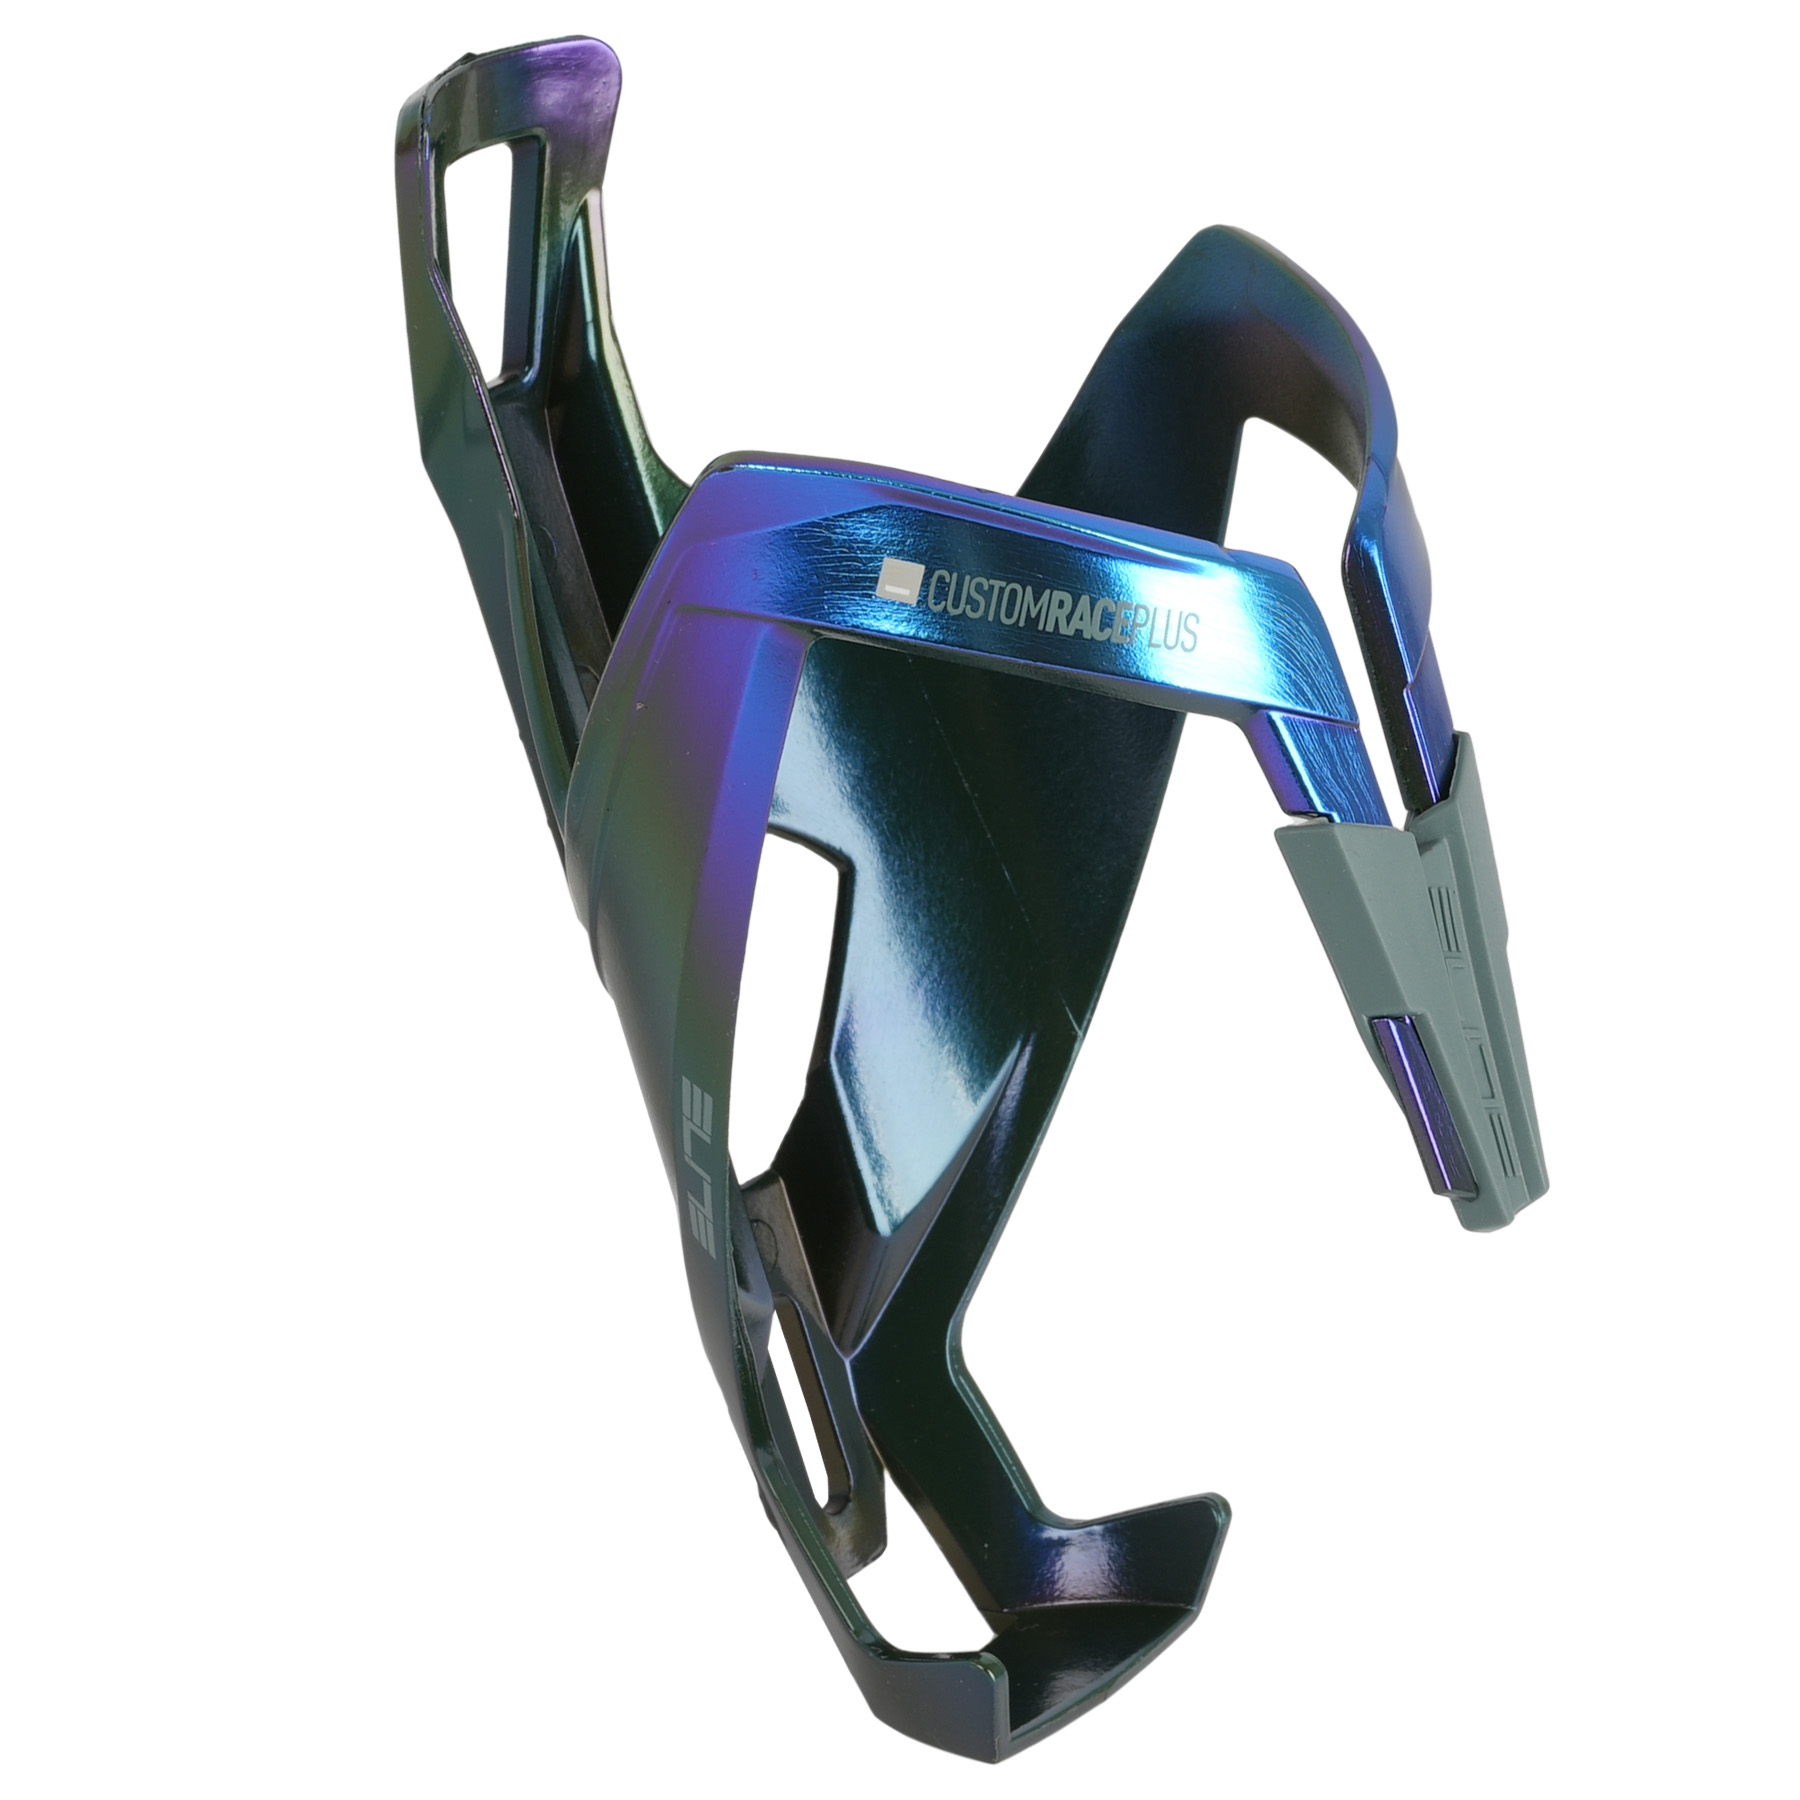 Picture of Elite Custom Race Plus 20 Bottle Cage - shiny green violet